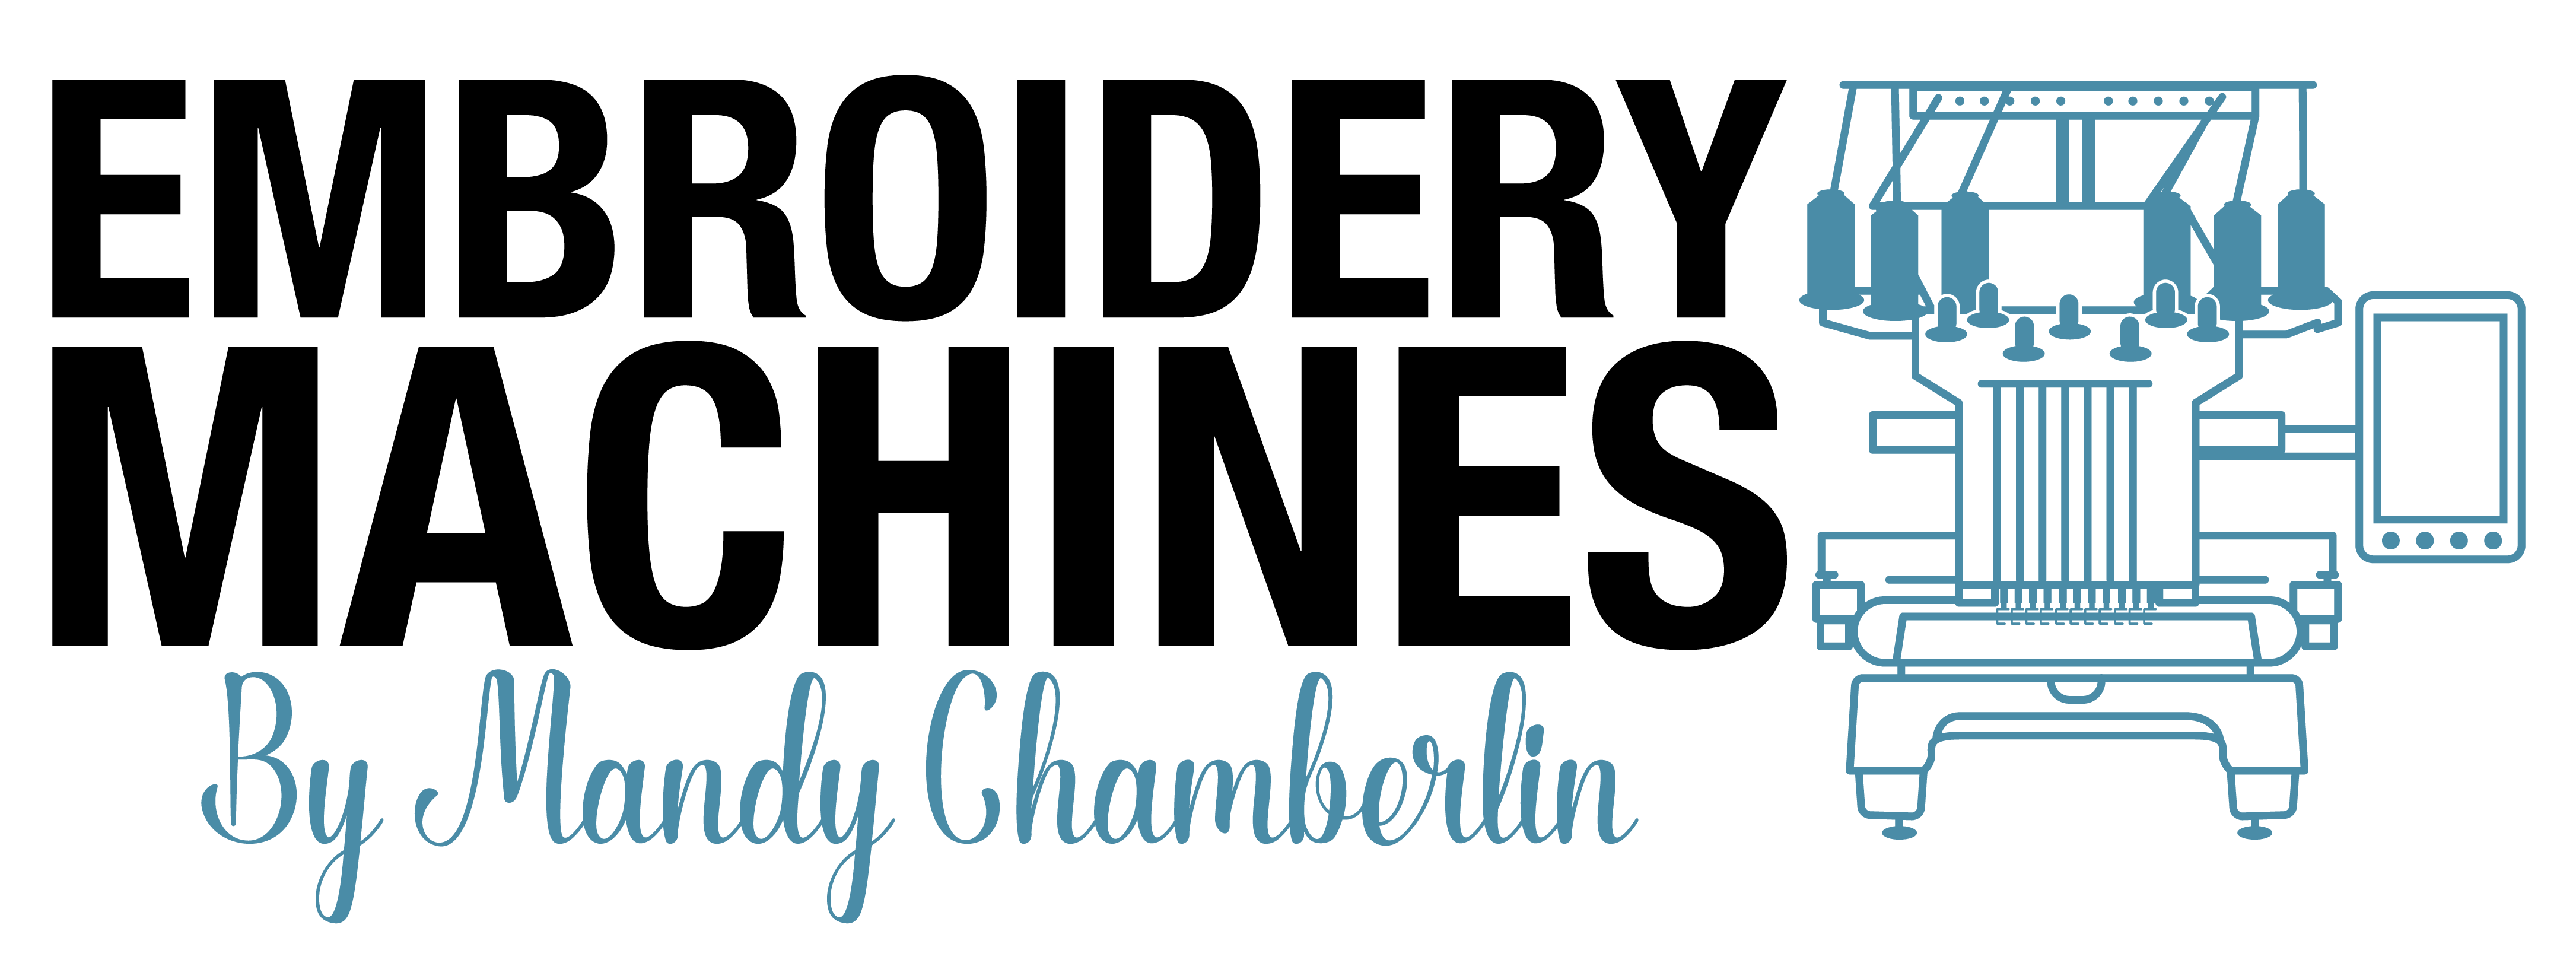 Embroidery Machines by Mandy Chamberlin HQ - Home of Echidna Sewing NZ | Brother Sewing Machines | Brother Embroidery Machines | Sewing Supplies | Embroidery Supplies | Brother Embroidery Machine Support